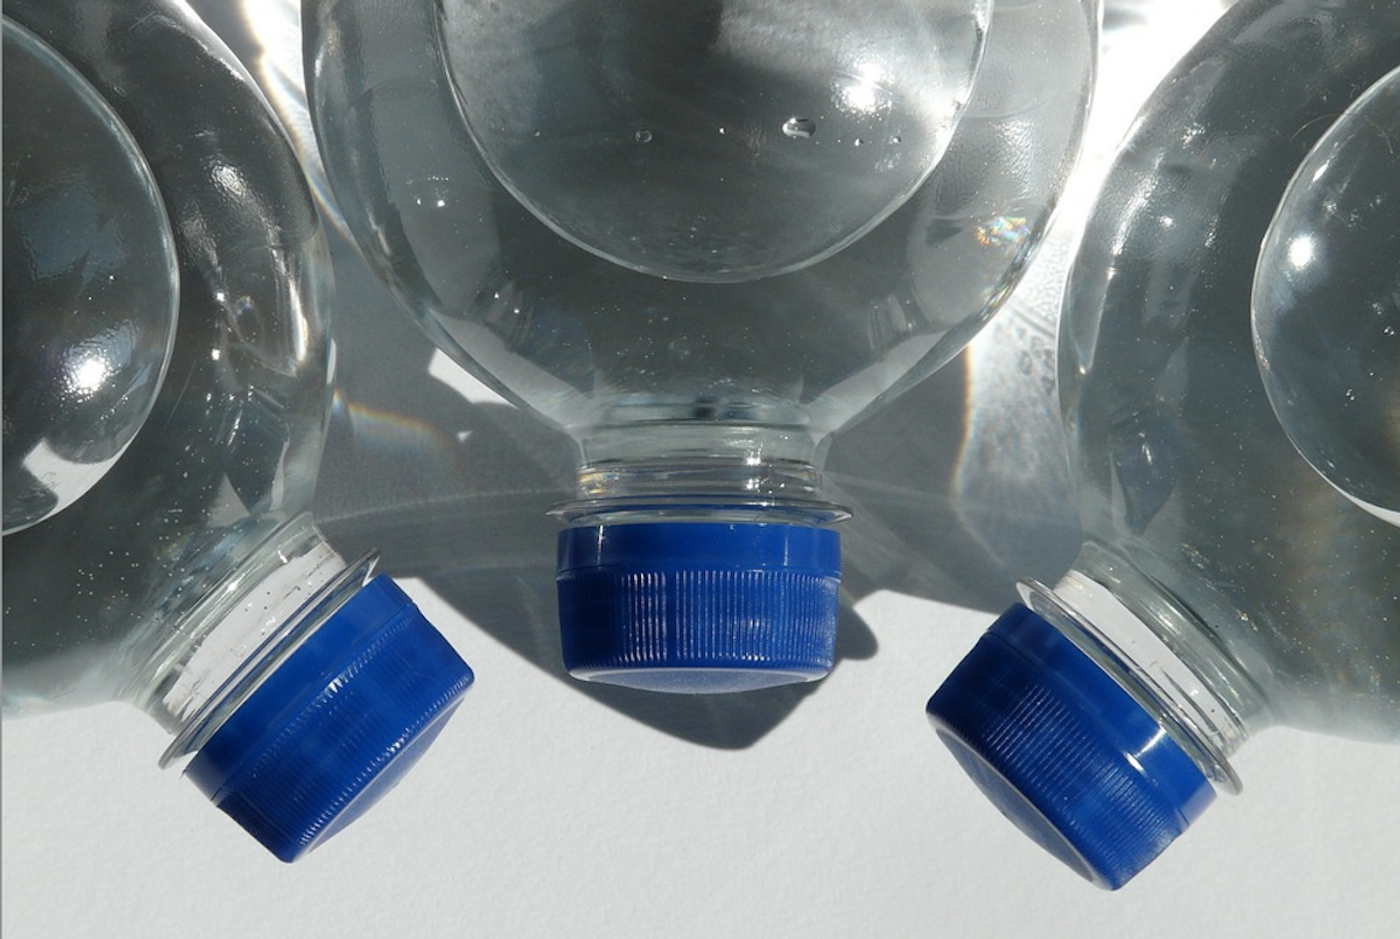 BPA has been used to make plastics for decades / Image credit: Pixabay